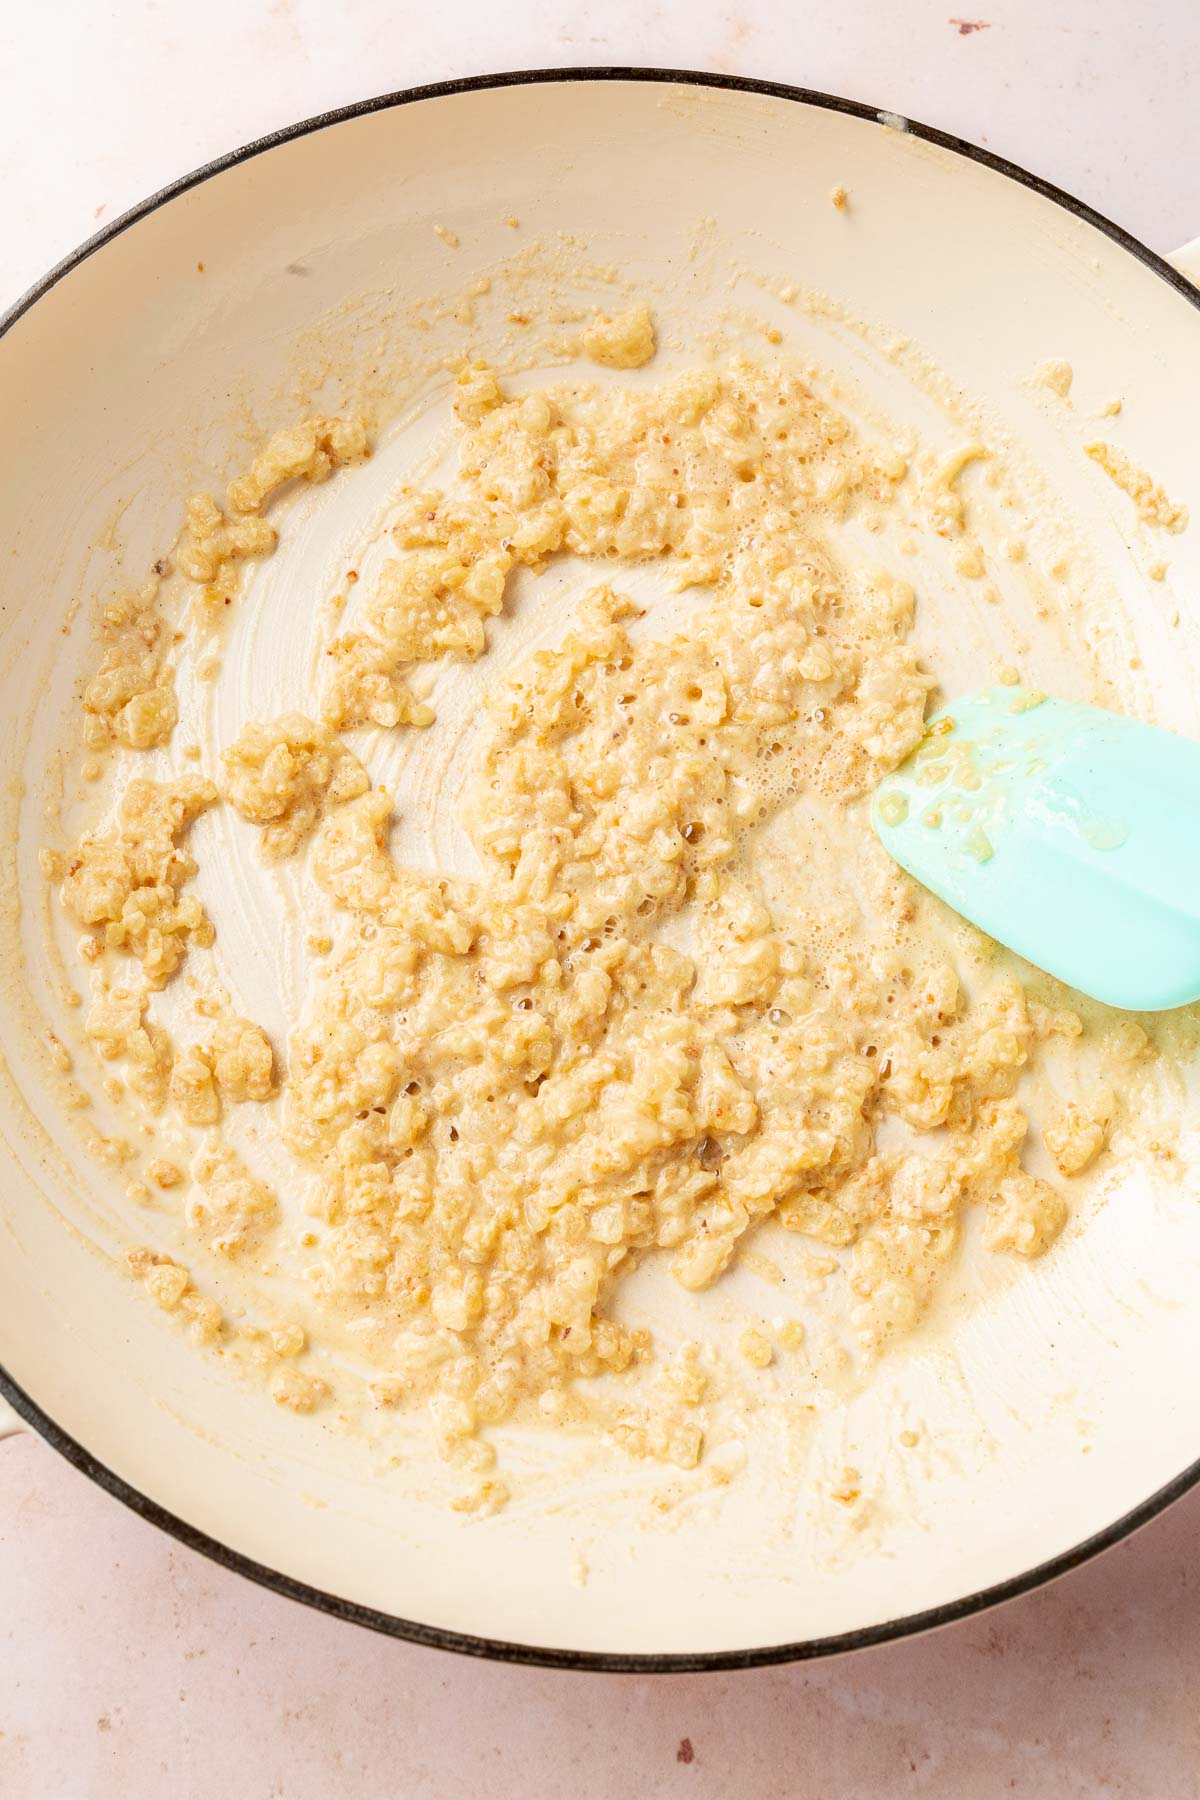 A braising pan with melted butter, sautéed onions and garlic mixed together with gluten-free flour that is being stirred together with a blue spatula to make a gluten-free roux.